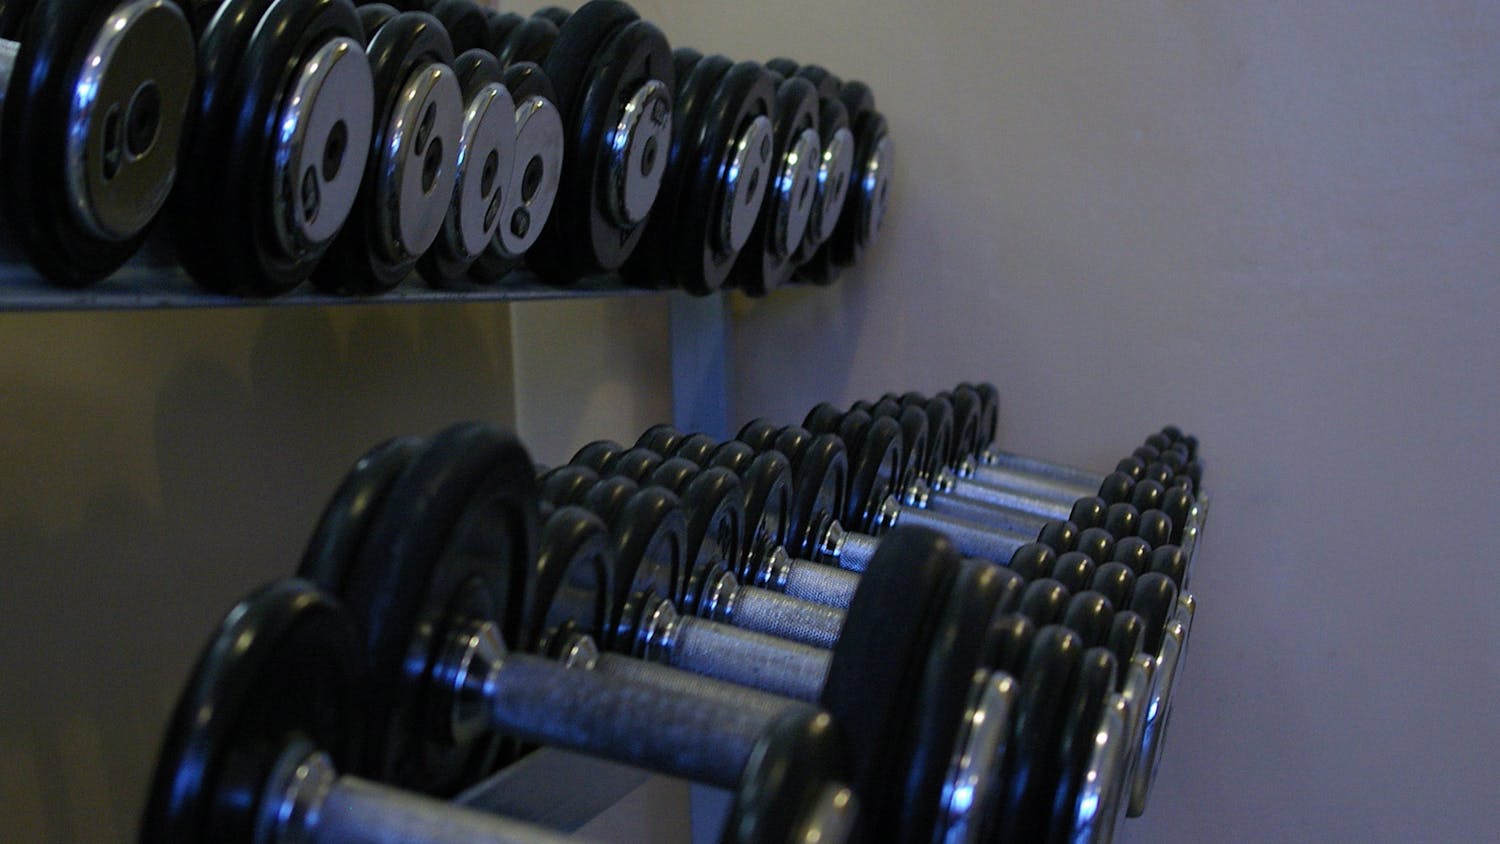 It is no secret that for many women, it is intimidating to go to the gym. (Photo courtesy of Flickr / martijn 365, Jan. 6, 2007)